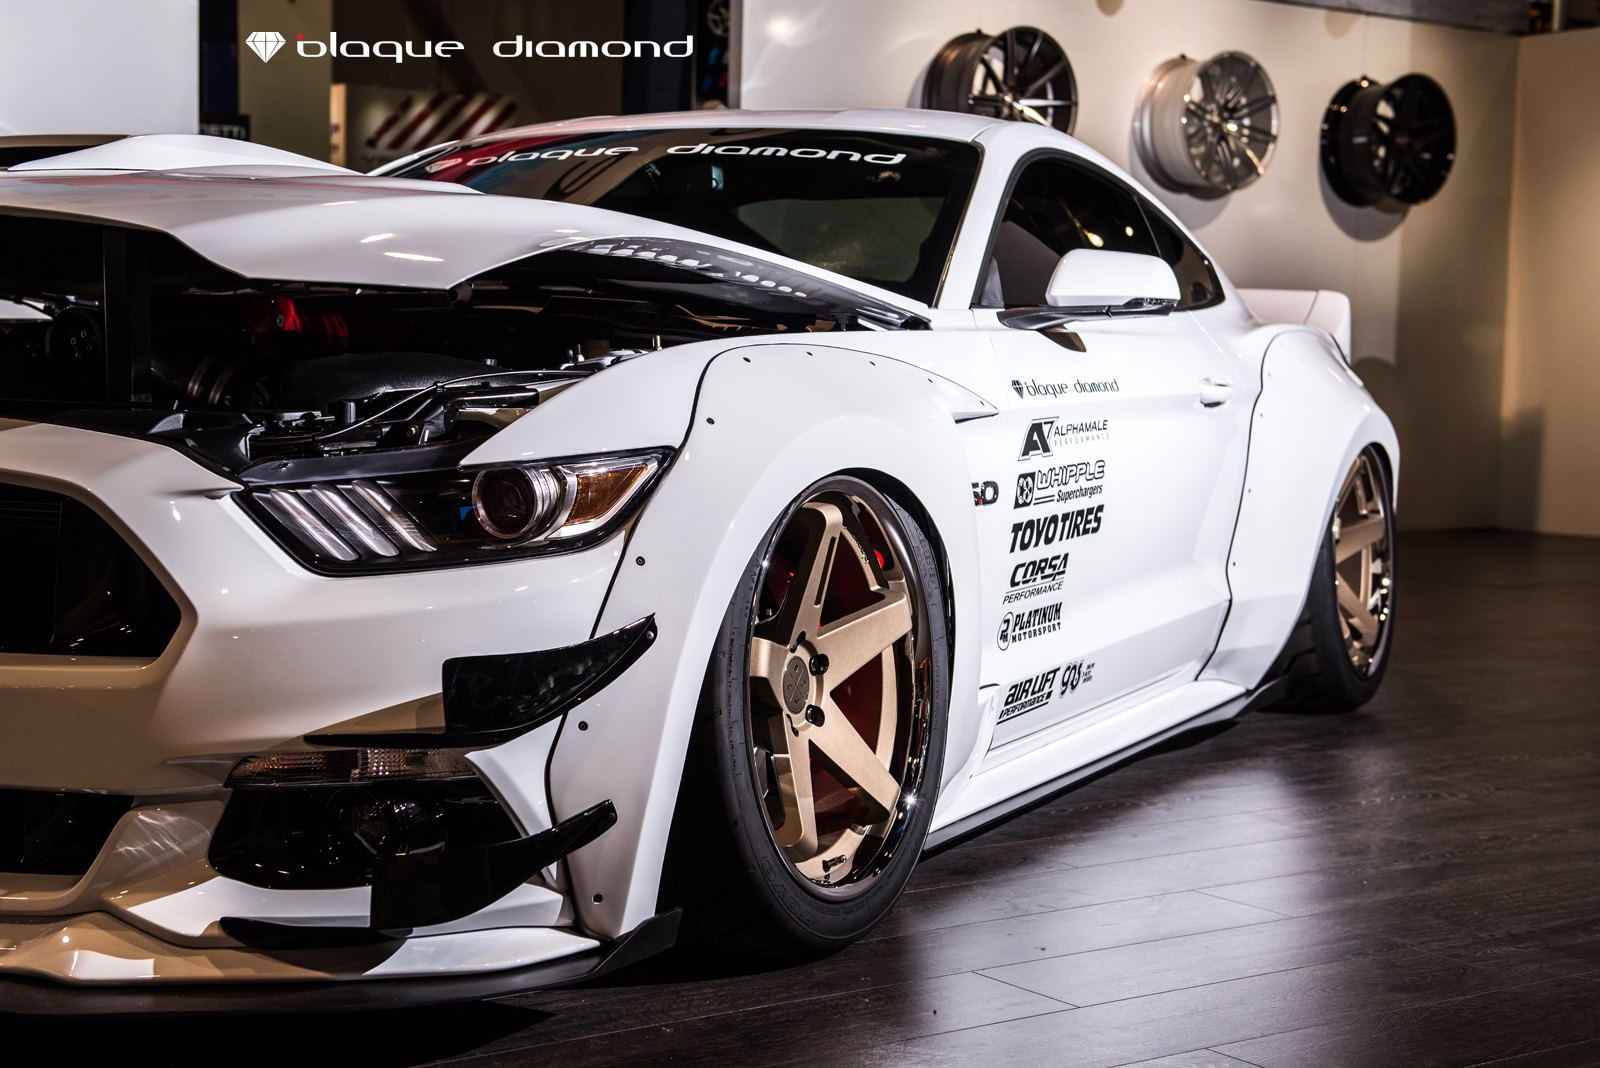 Front Bumper Canards on Ford Mustang S550 - Photo by Black Diamond